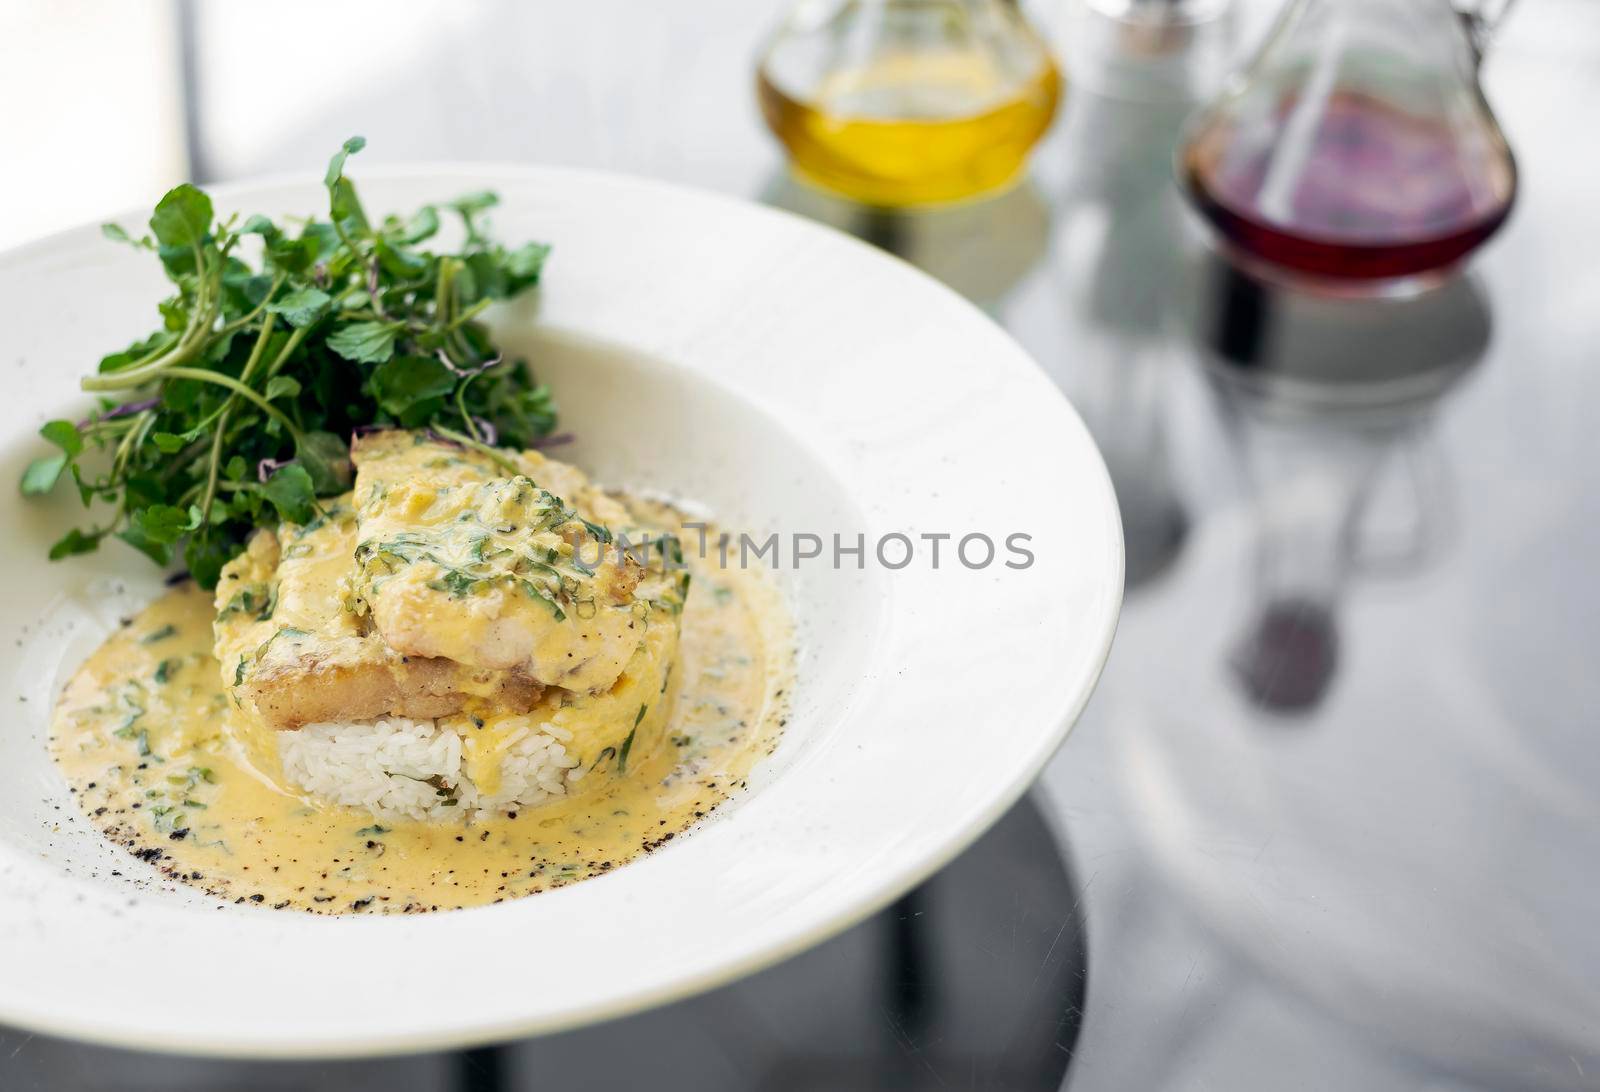 sea bream fish fillet in creamy mustard dill and lemon sauce restaurant meal on plate